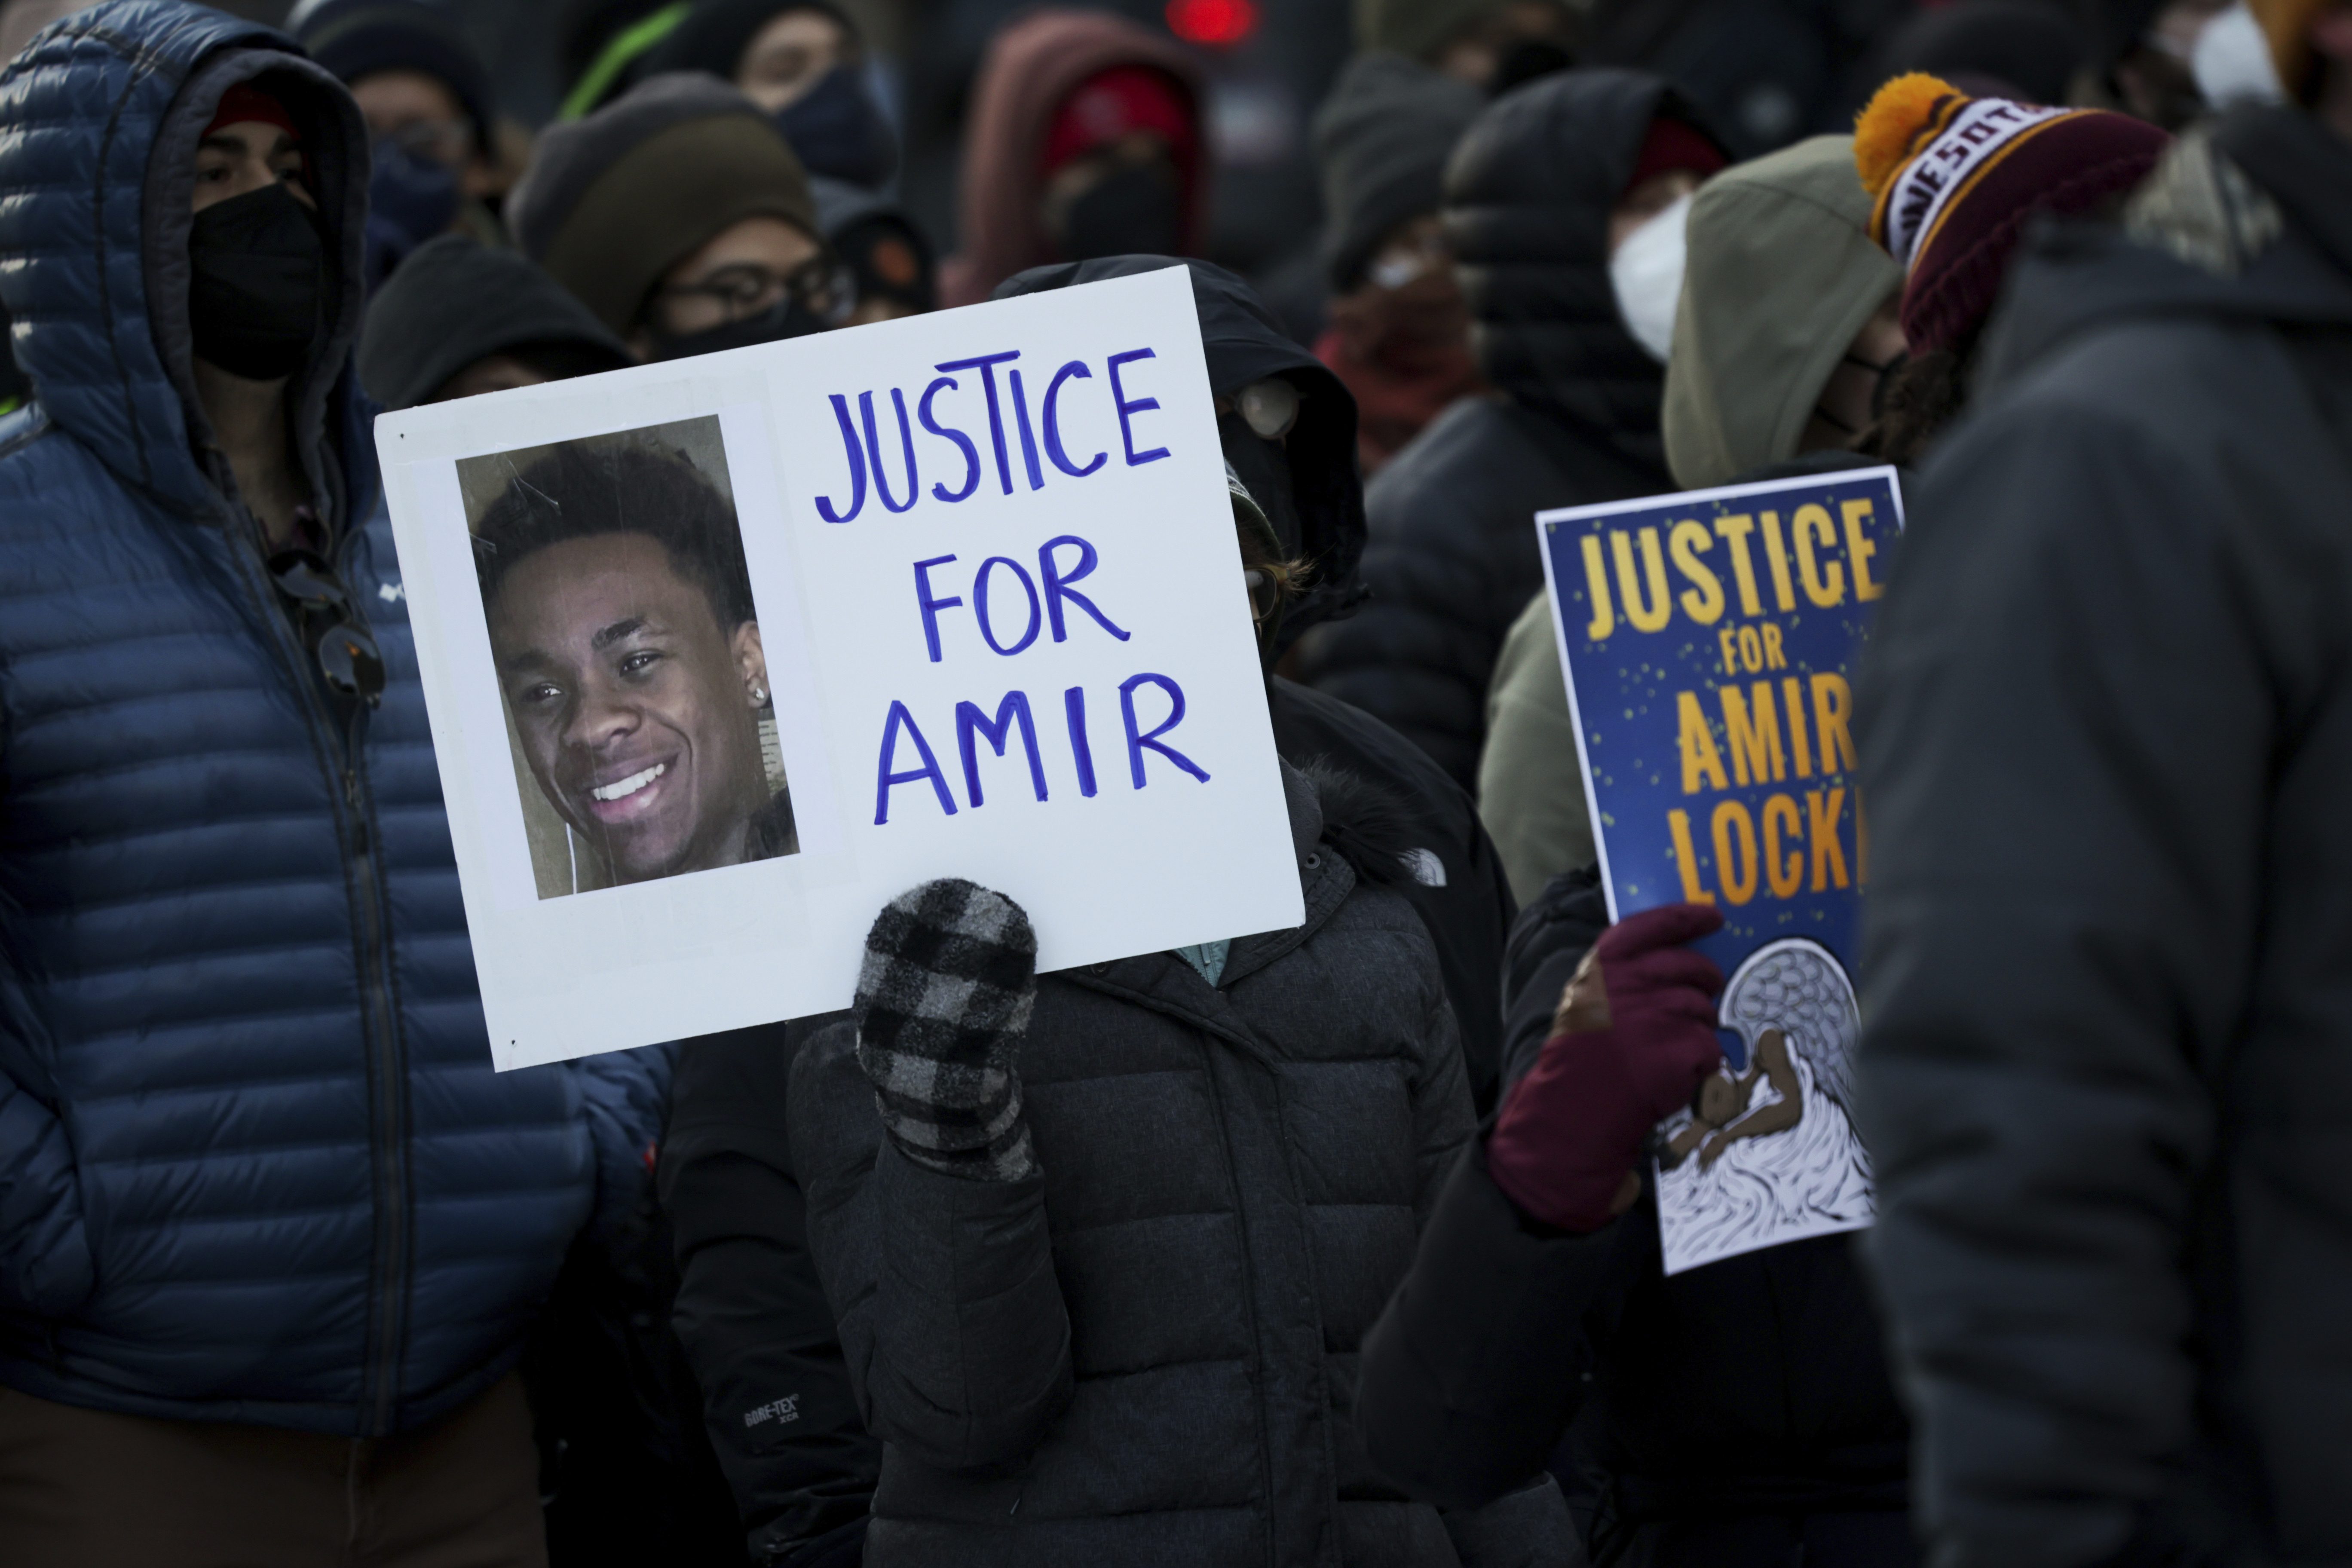 Protesters demanding justice for Amir Locke on Friday.